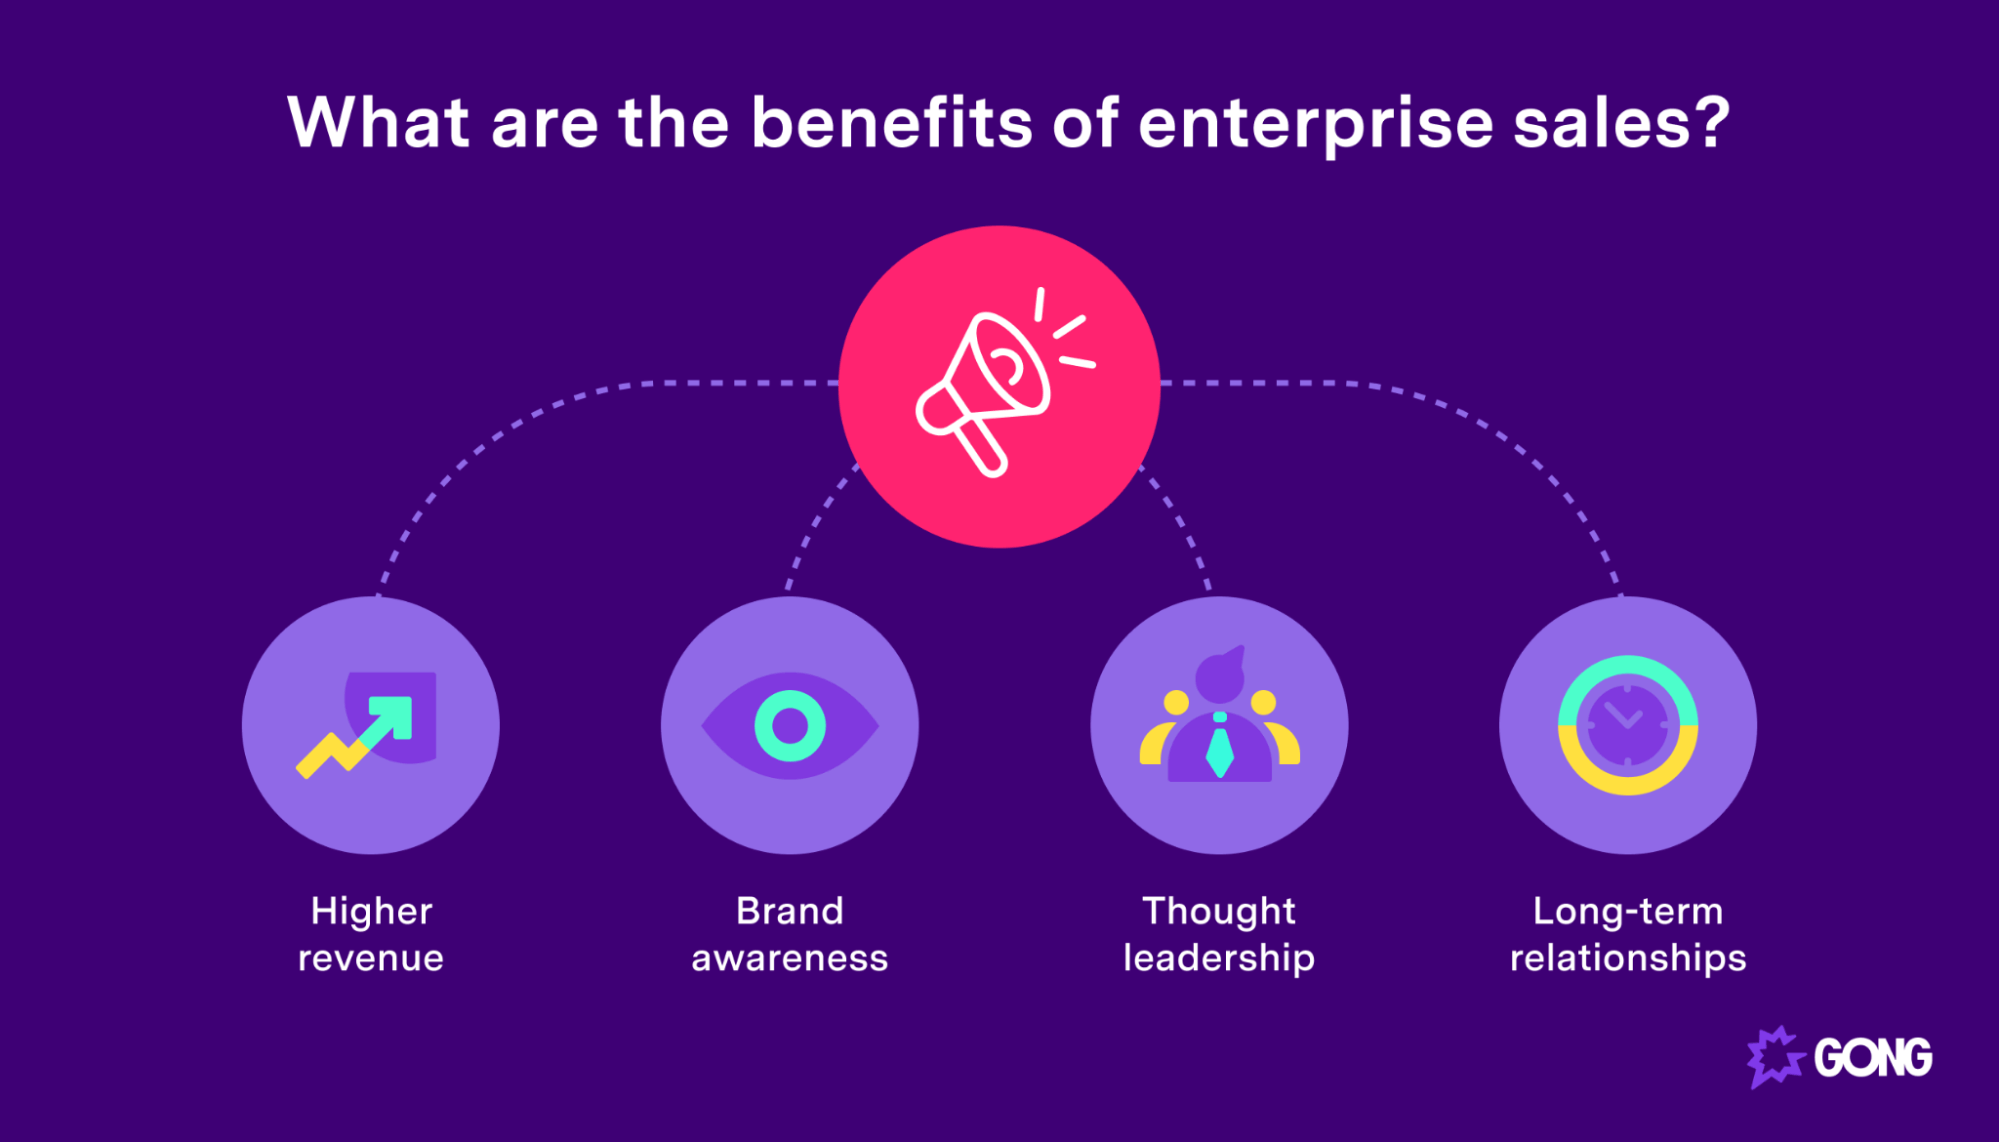 What are the benefits of enterprise sales?